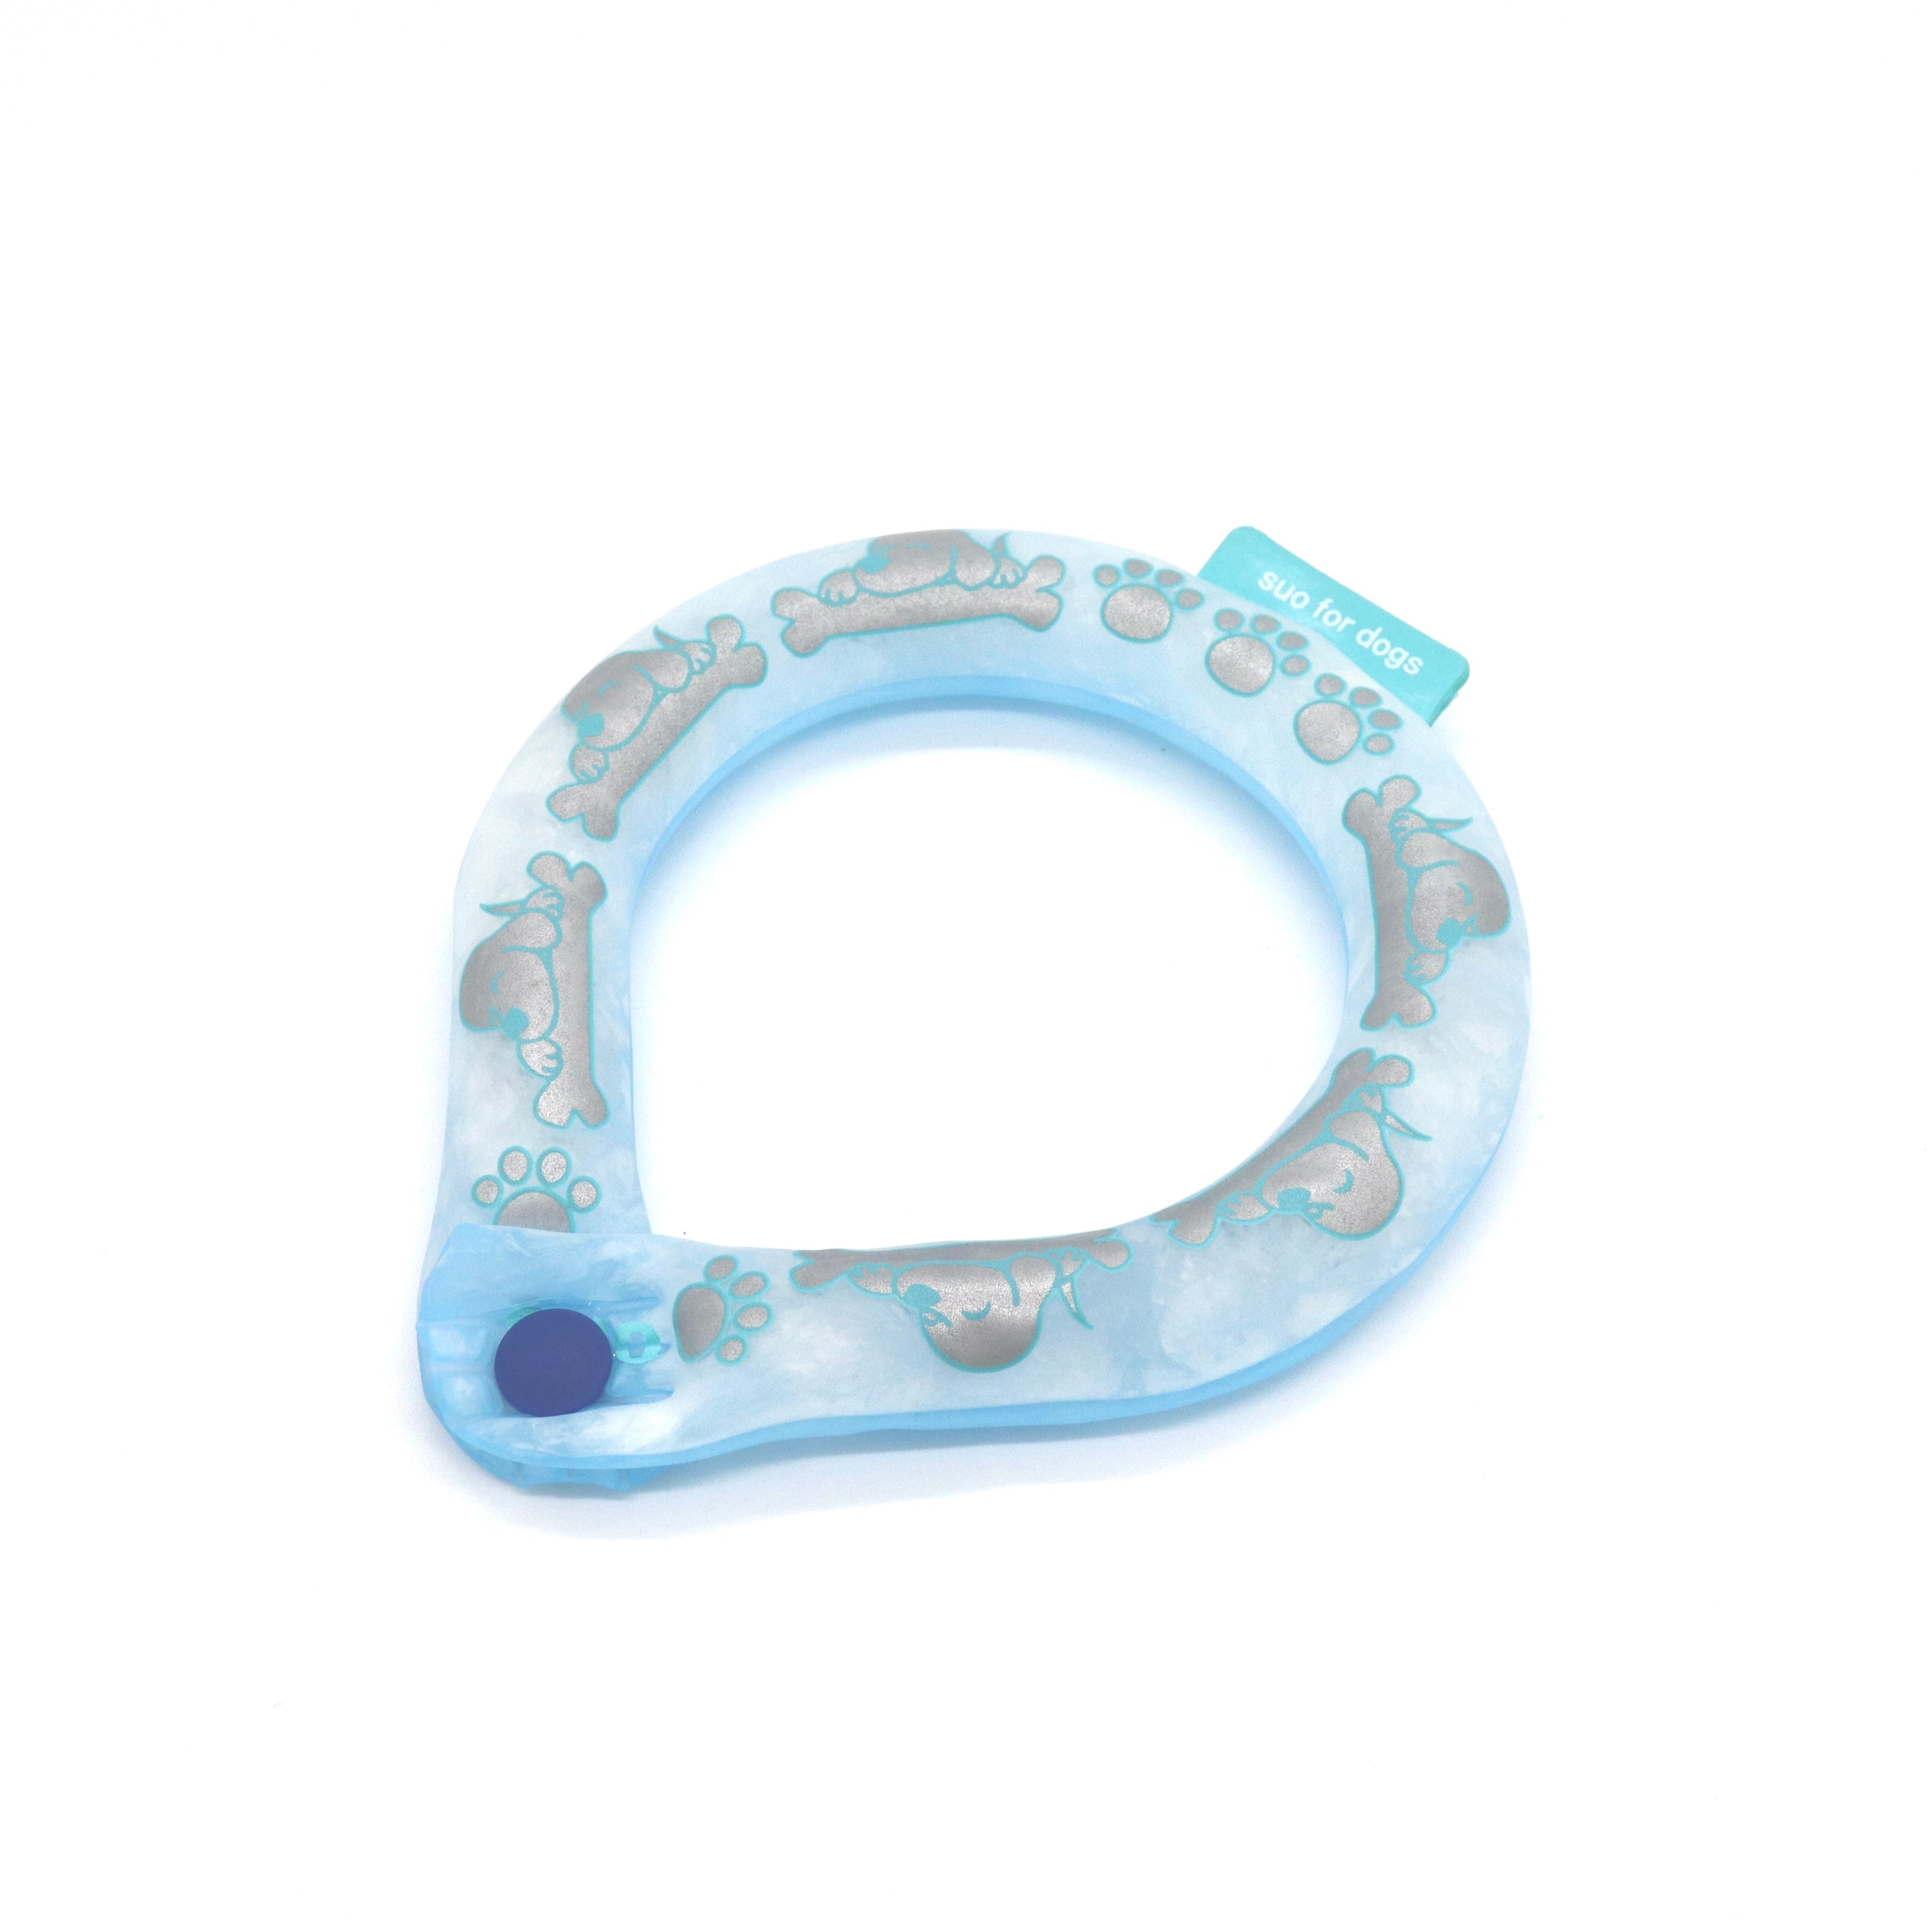 SUO RING for dogs 犬柄 reflector ボタン付